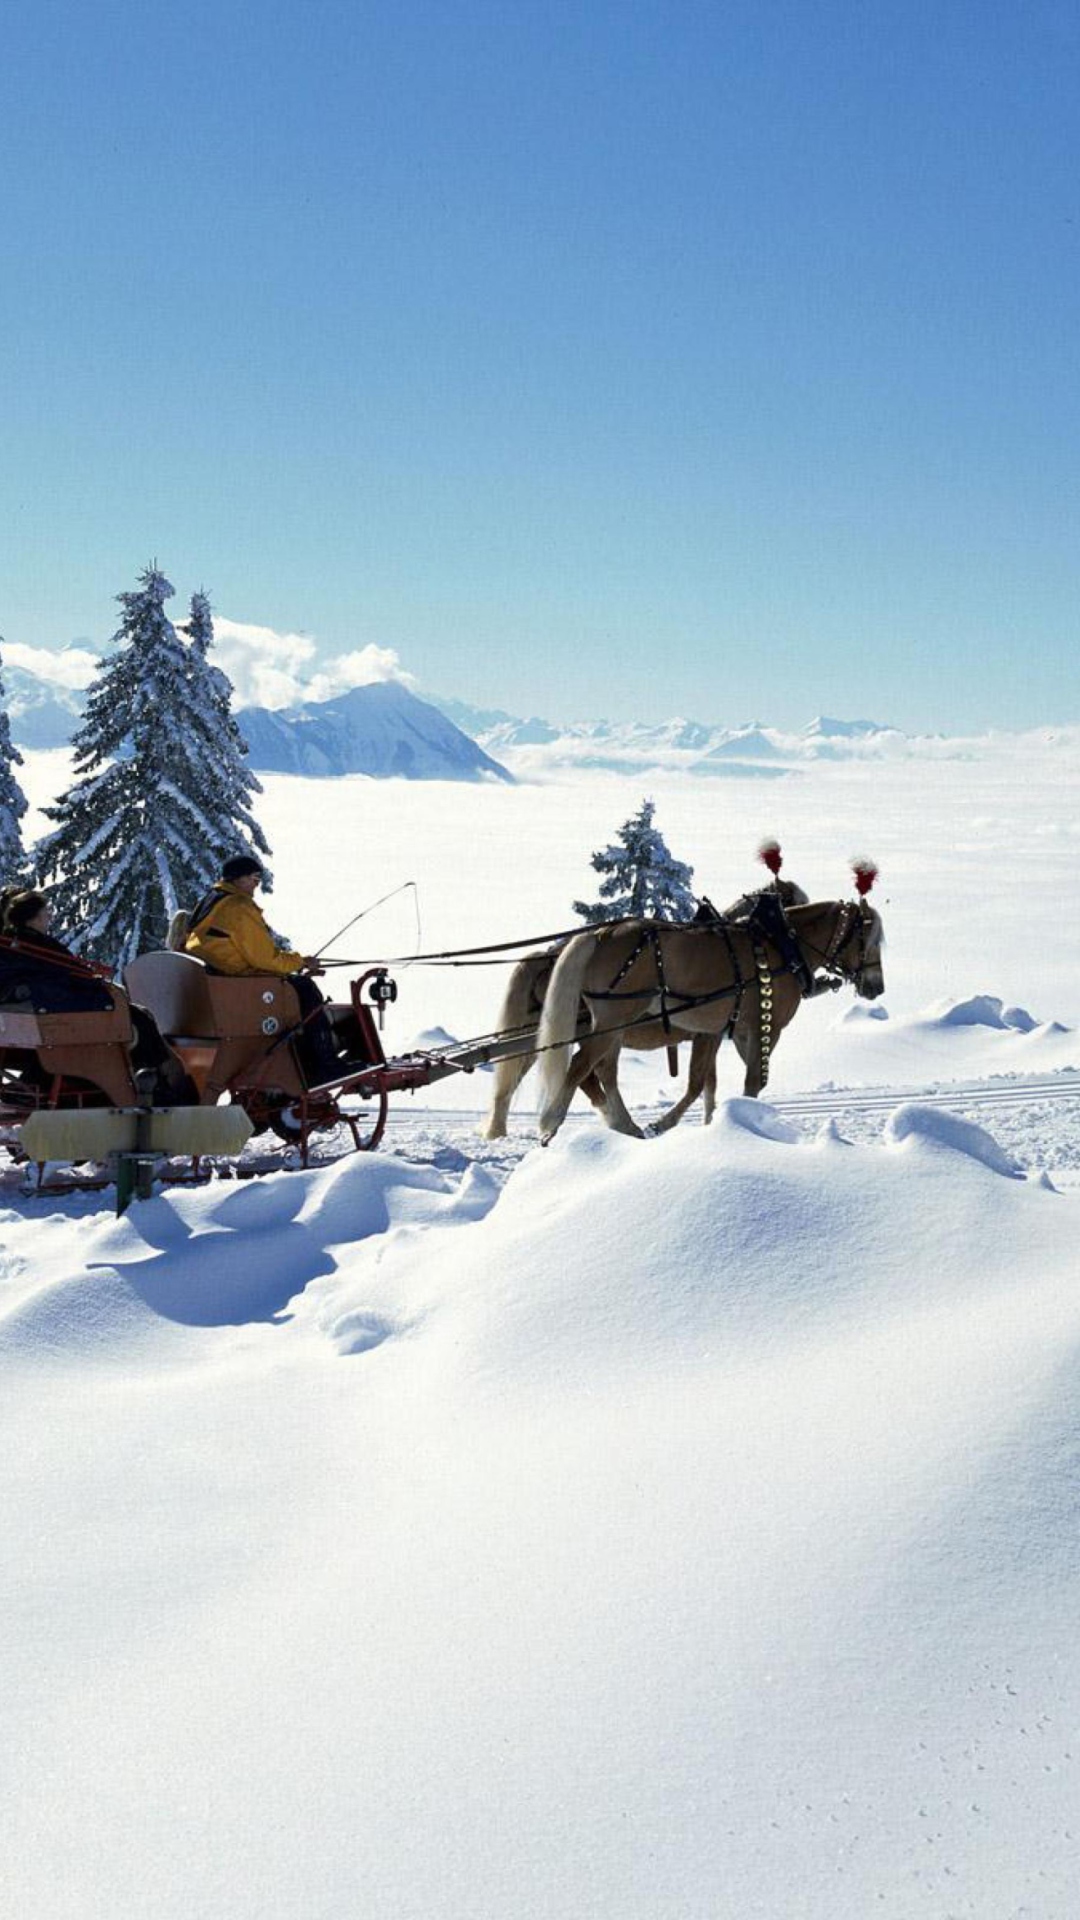 Winter Snow And Sleigh With Horses screenshot #1 1080x1920